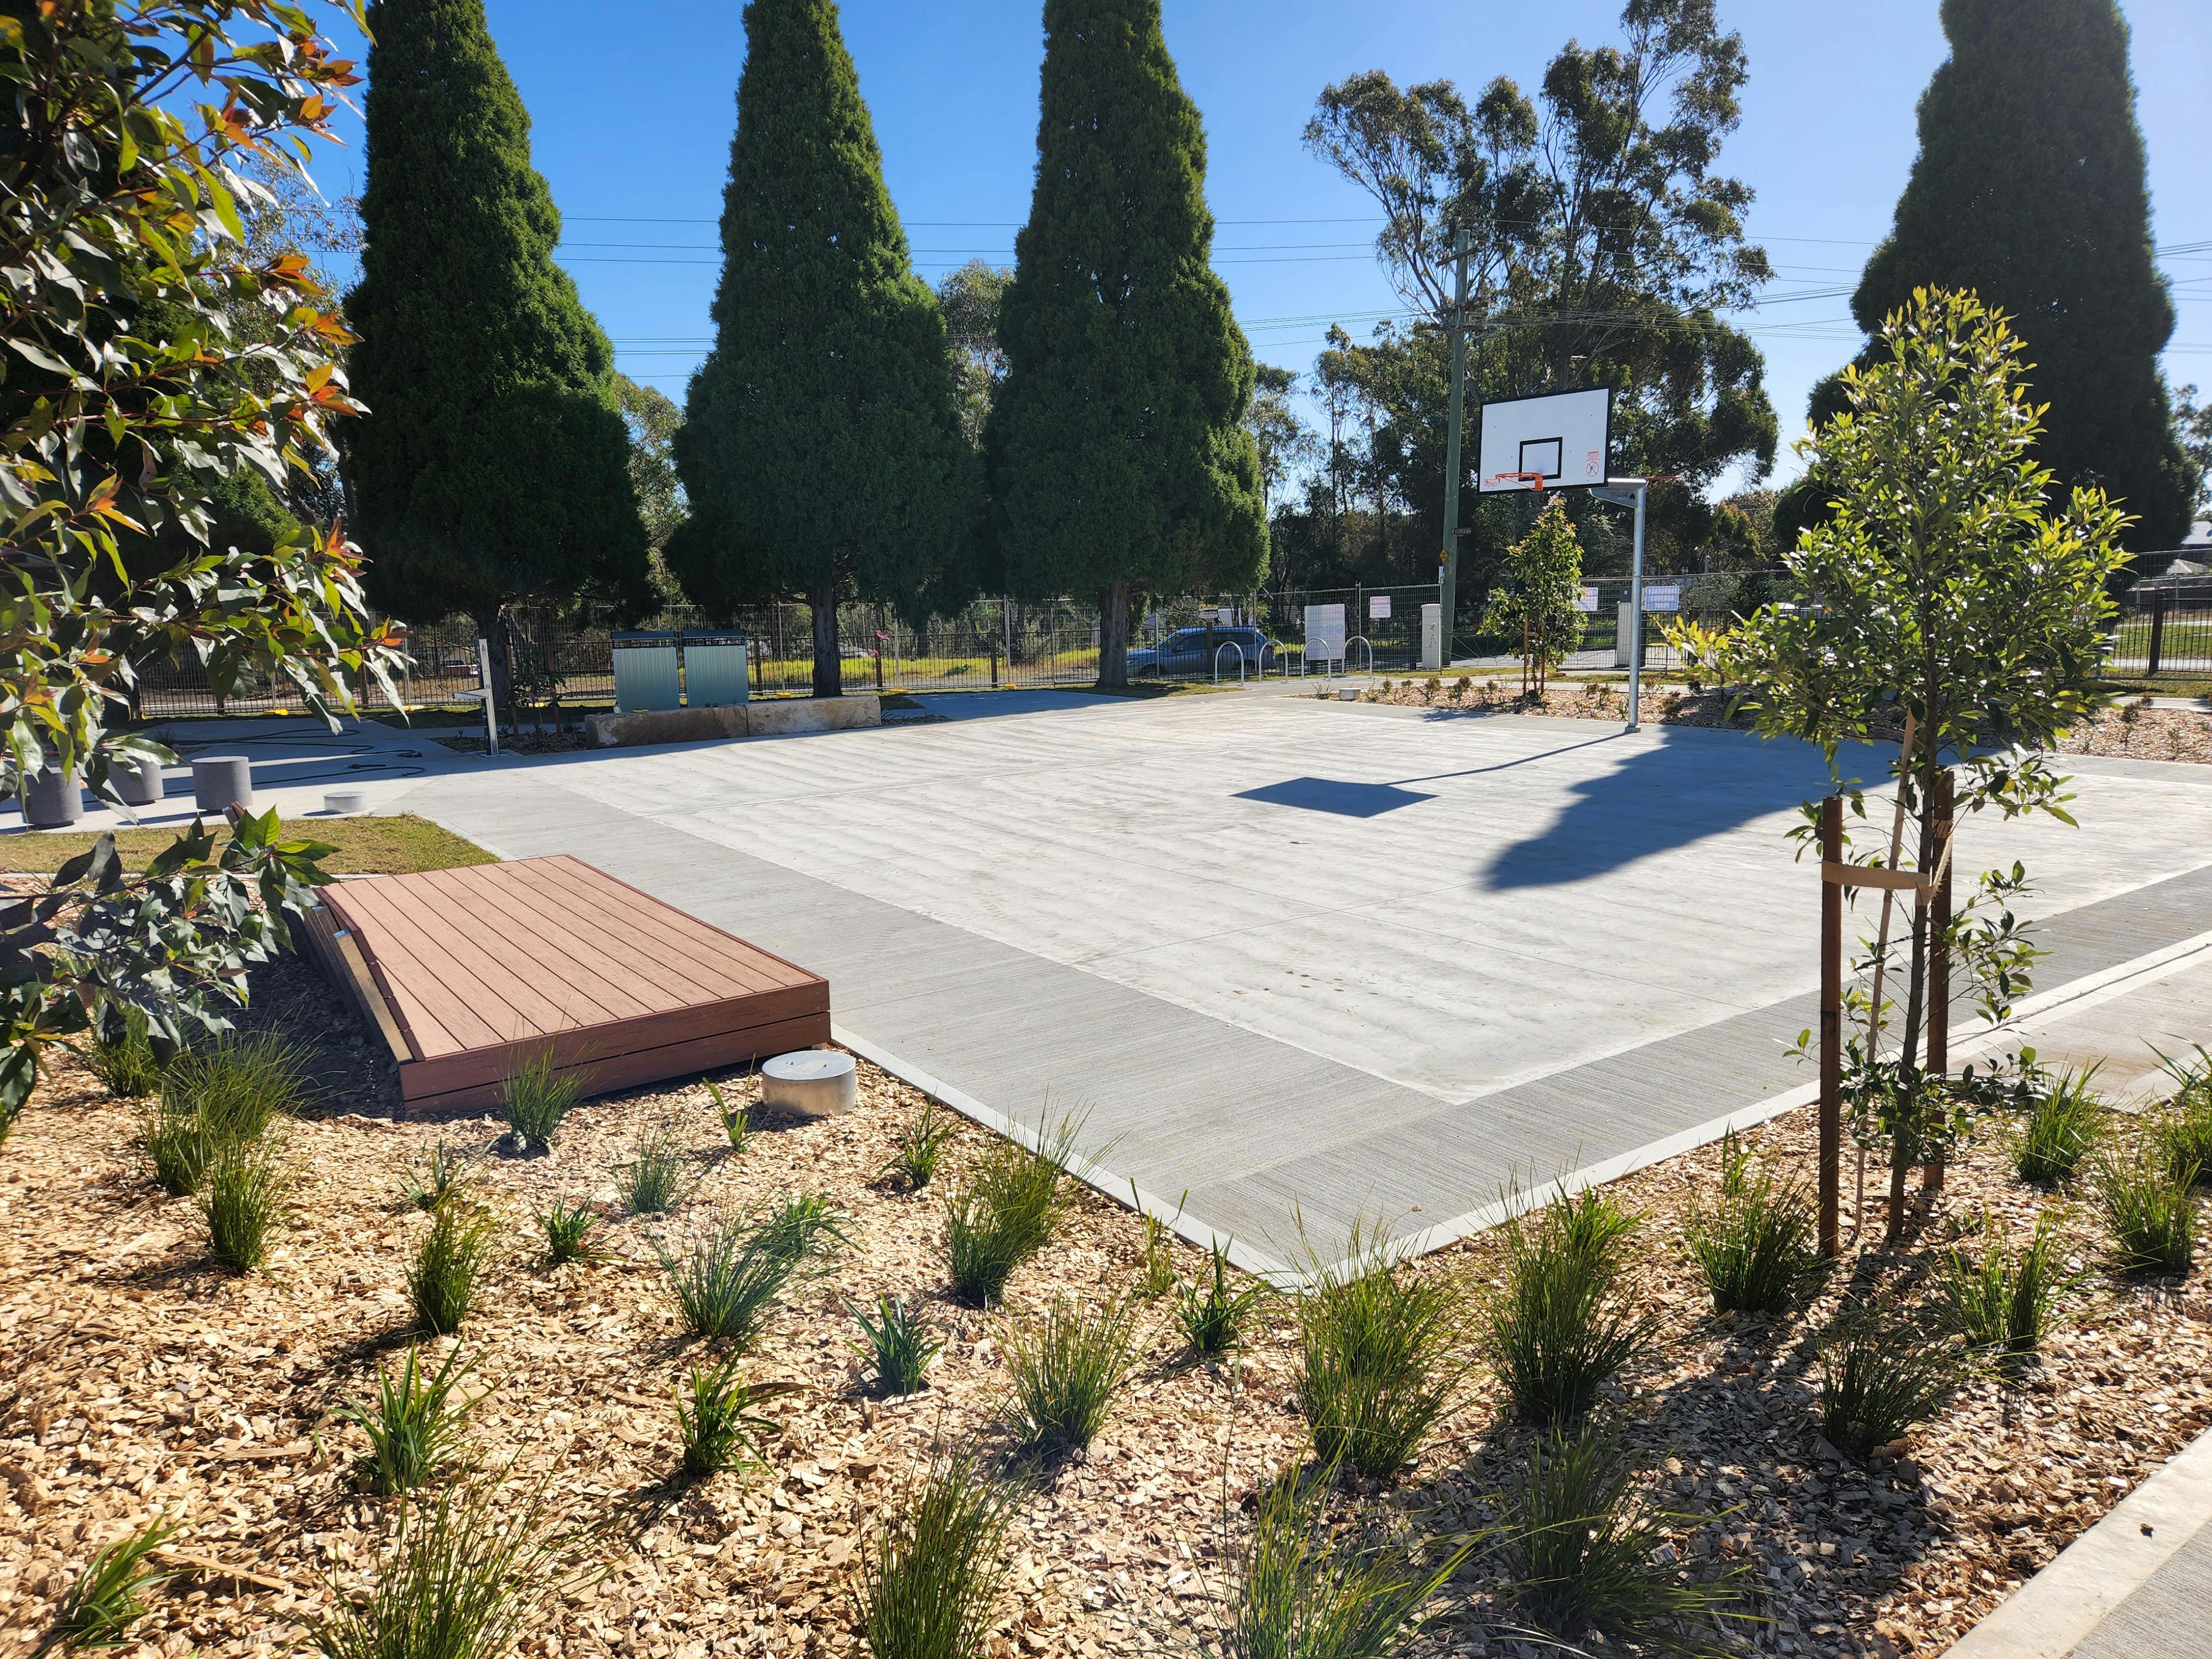 Basketball half court at Telopea Park Youth Zone